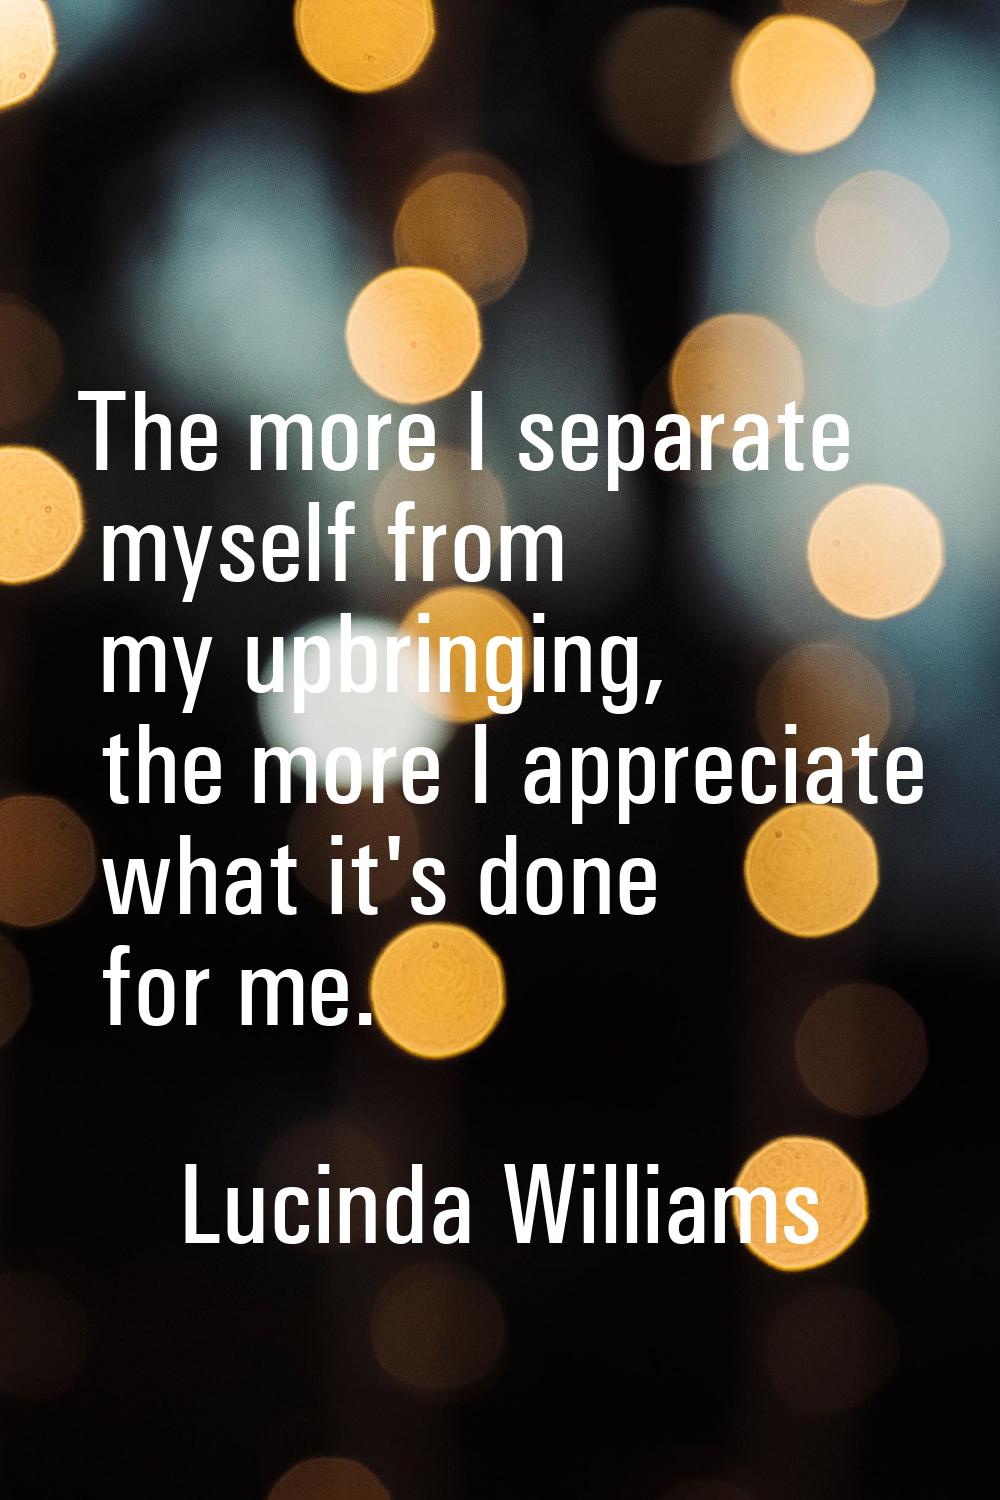 The more I separate myself from my upbringing, the more I appreciate what it's done for me.